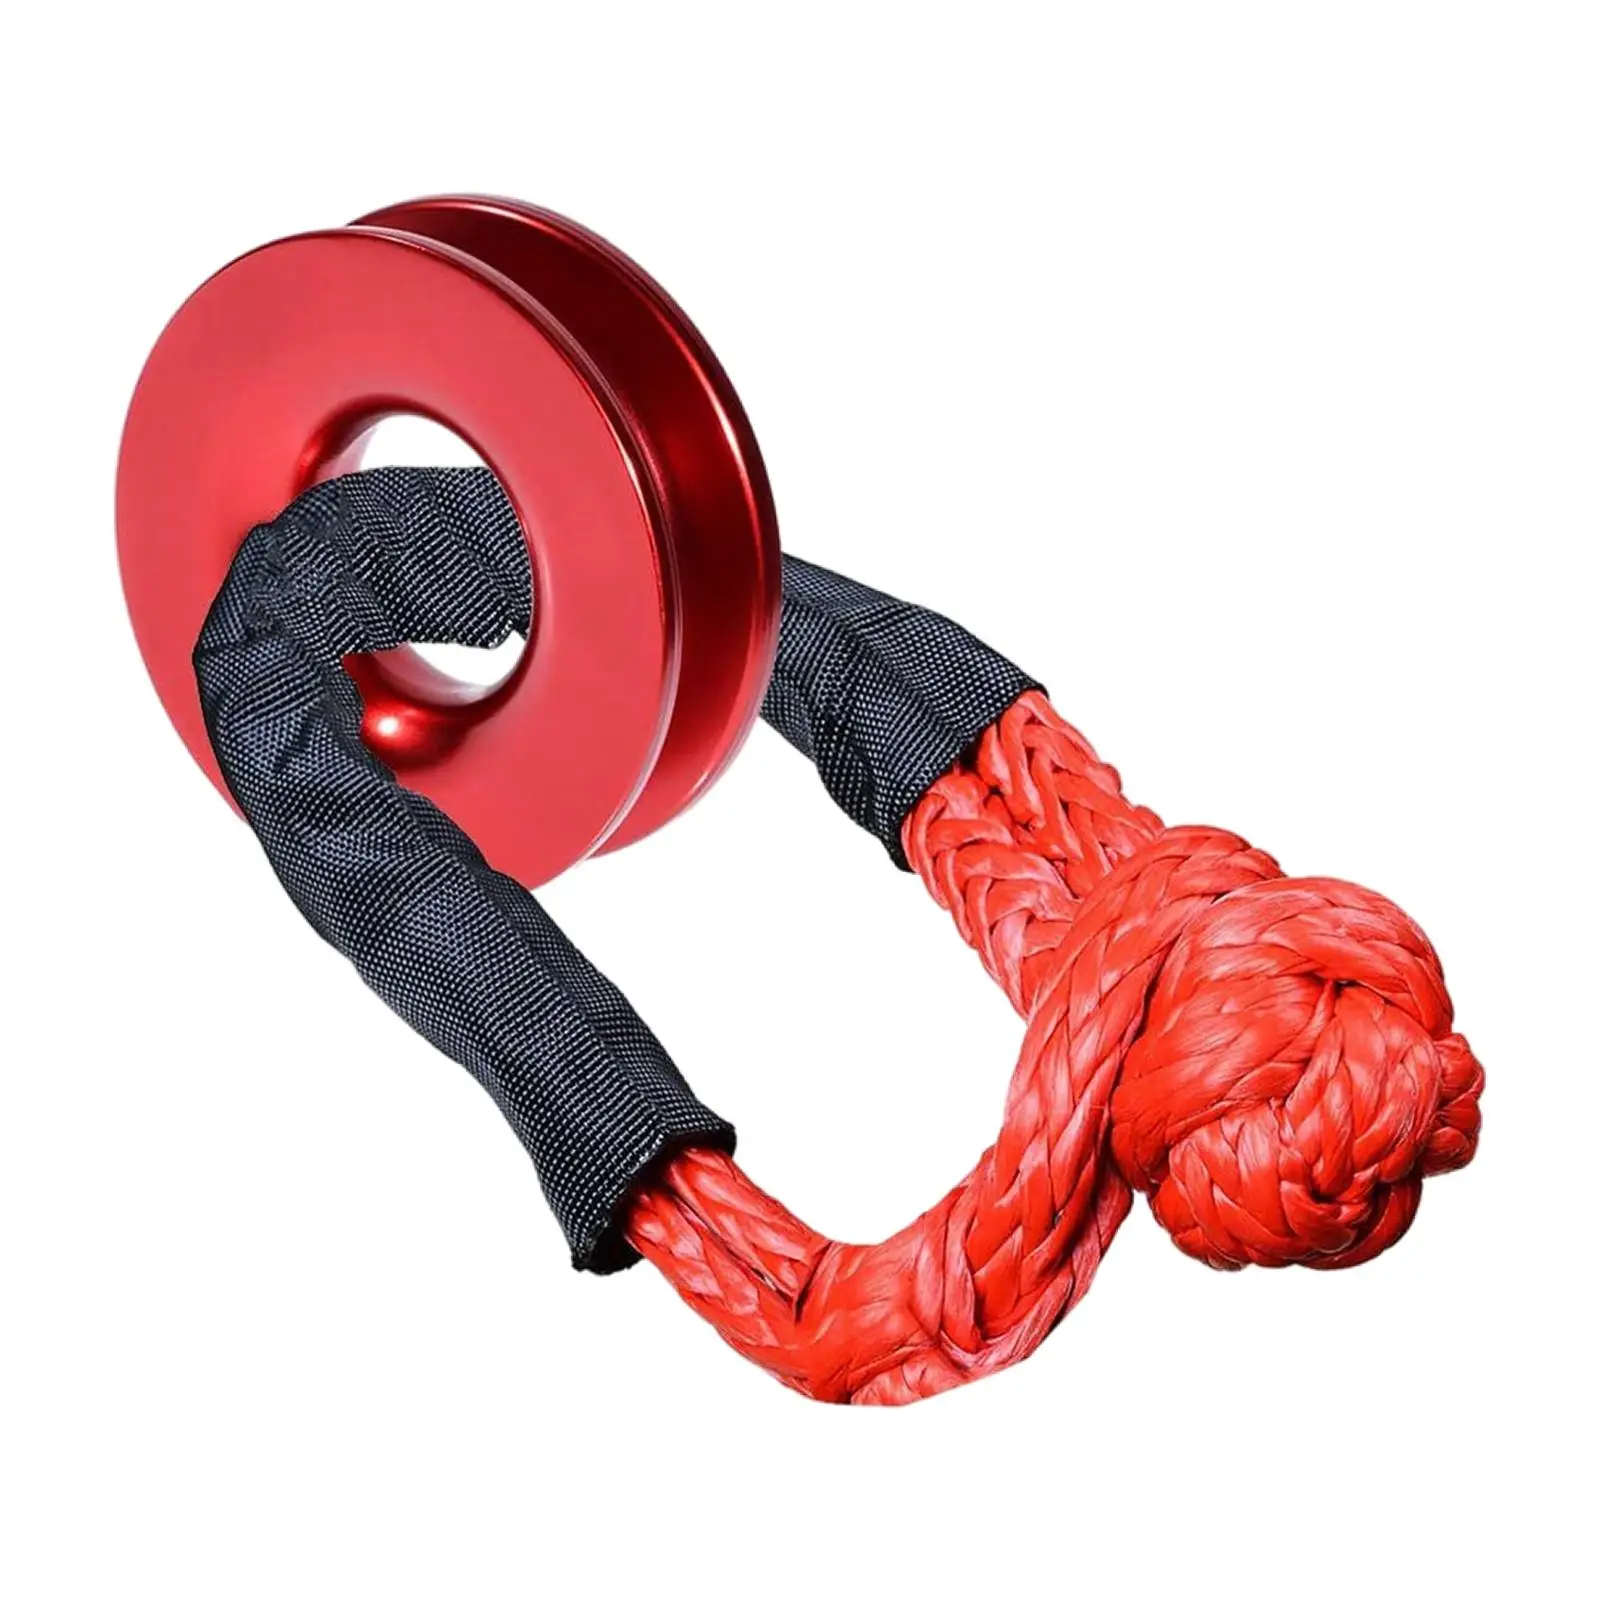 Winch Snatch Recovery Ring 38000 lbs Winch Soft Shackle Snatch Ring Block Towing Car Breakdowns Depot ATV UTV Cars Marine Boat